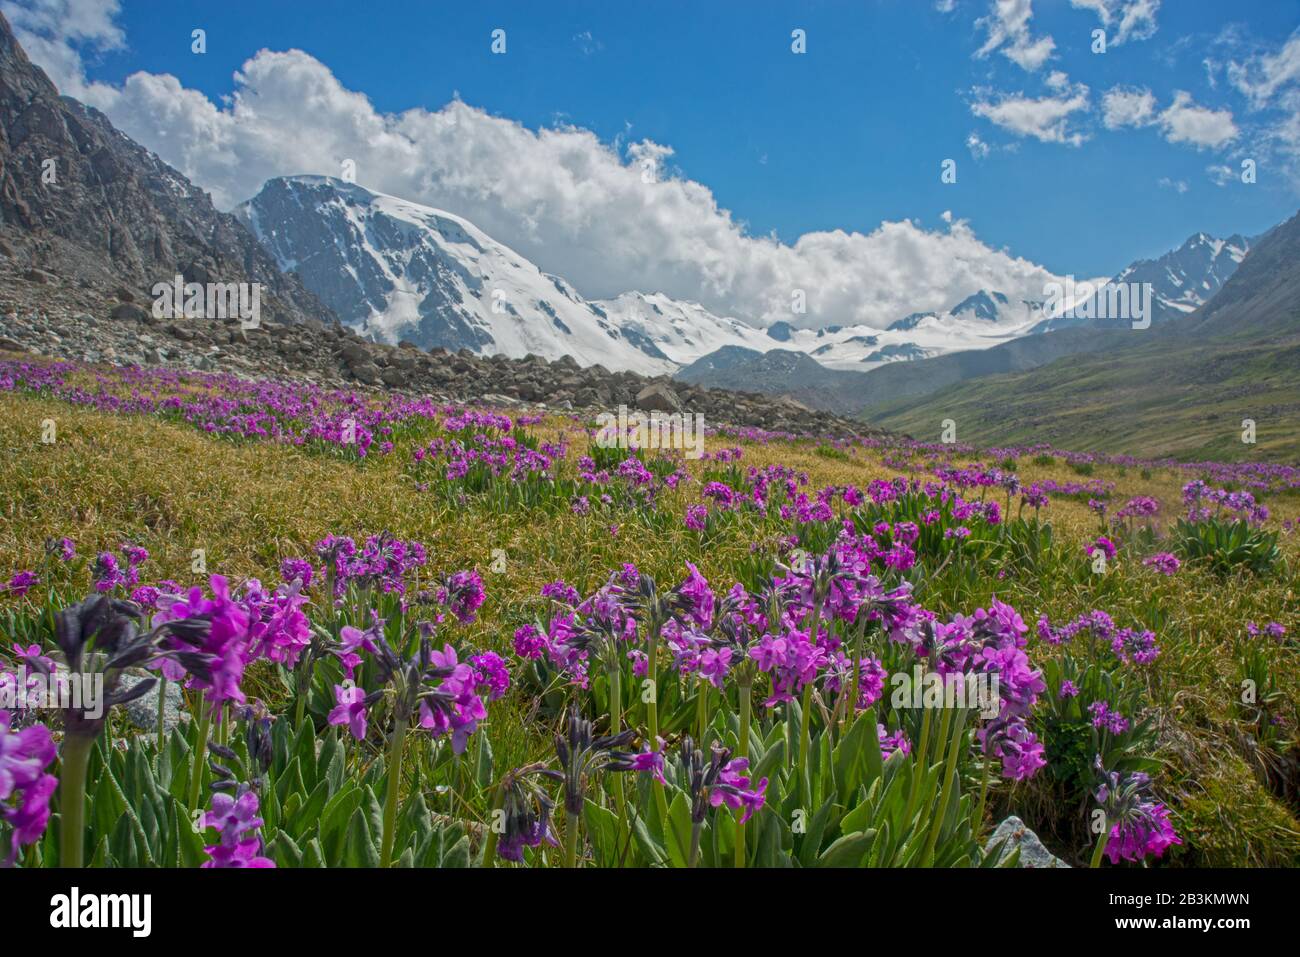 Pink (violet) primula against the high mountains background. Season - spring or the first part of summer. Flowers - Primula turkestanica. Stock Photo